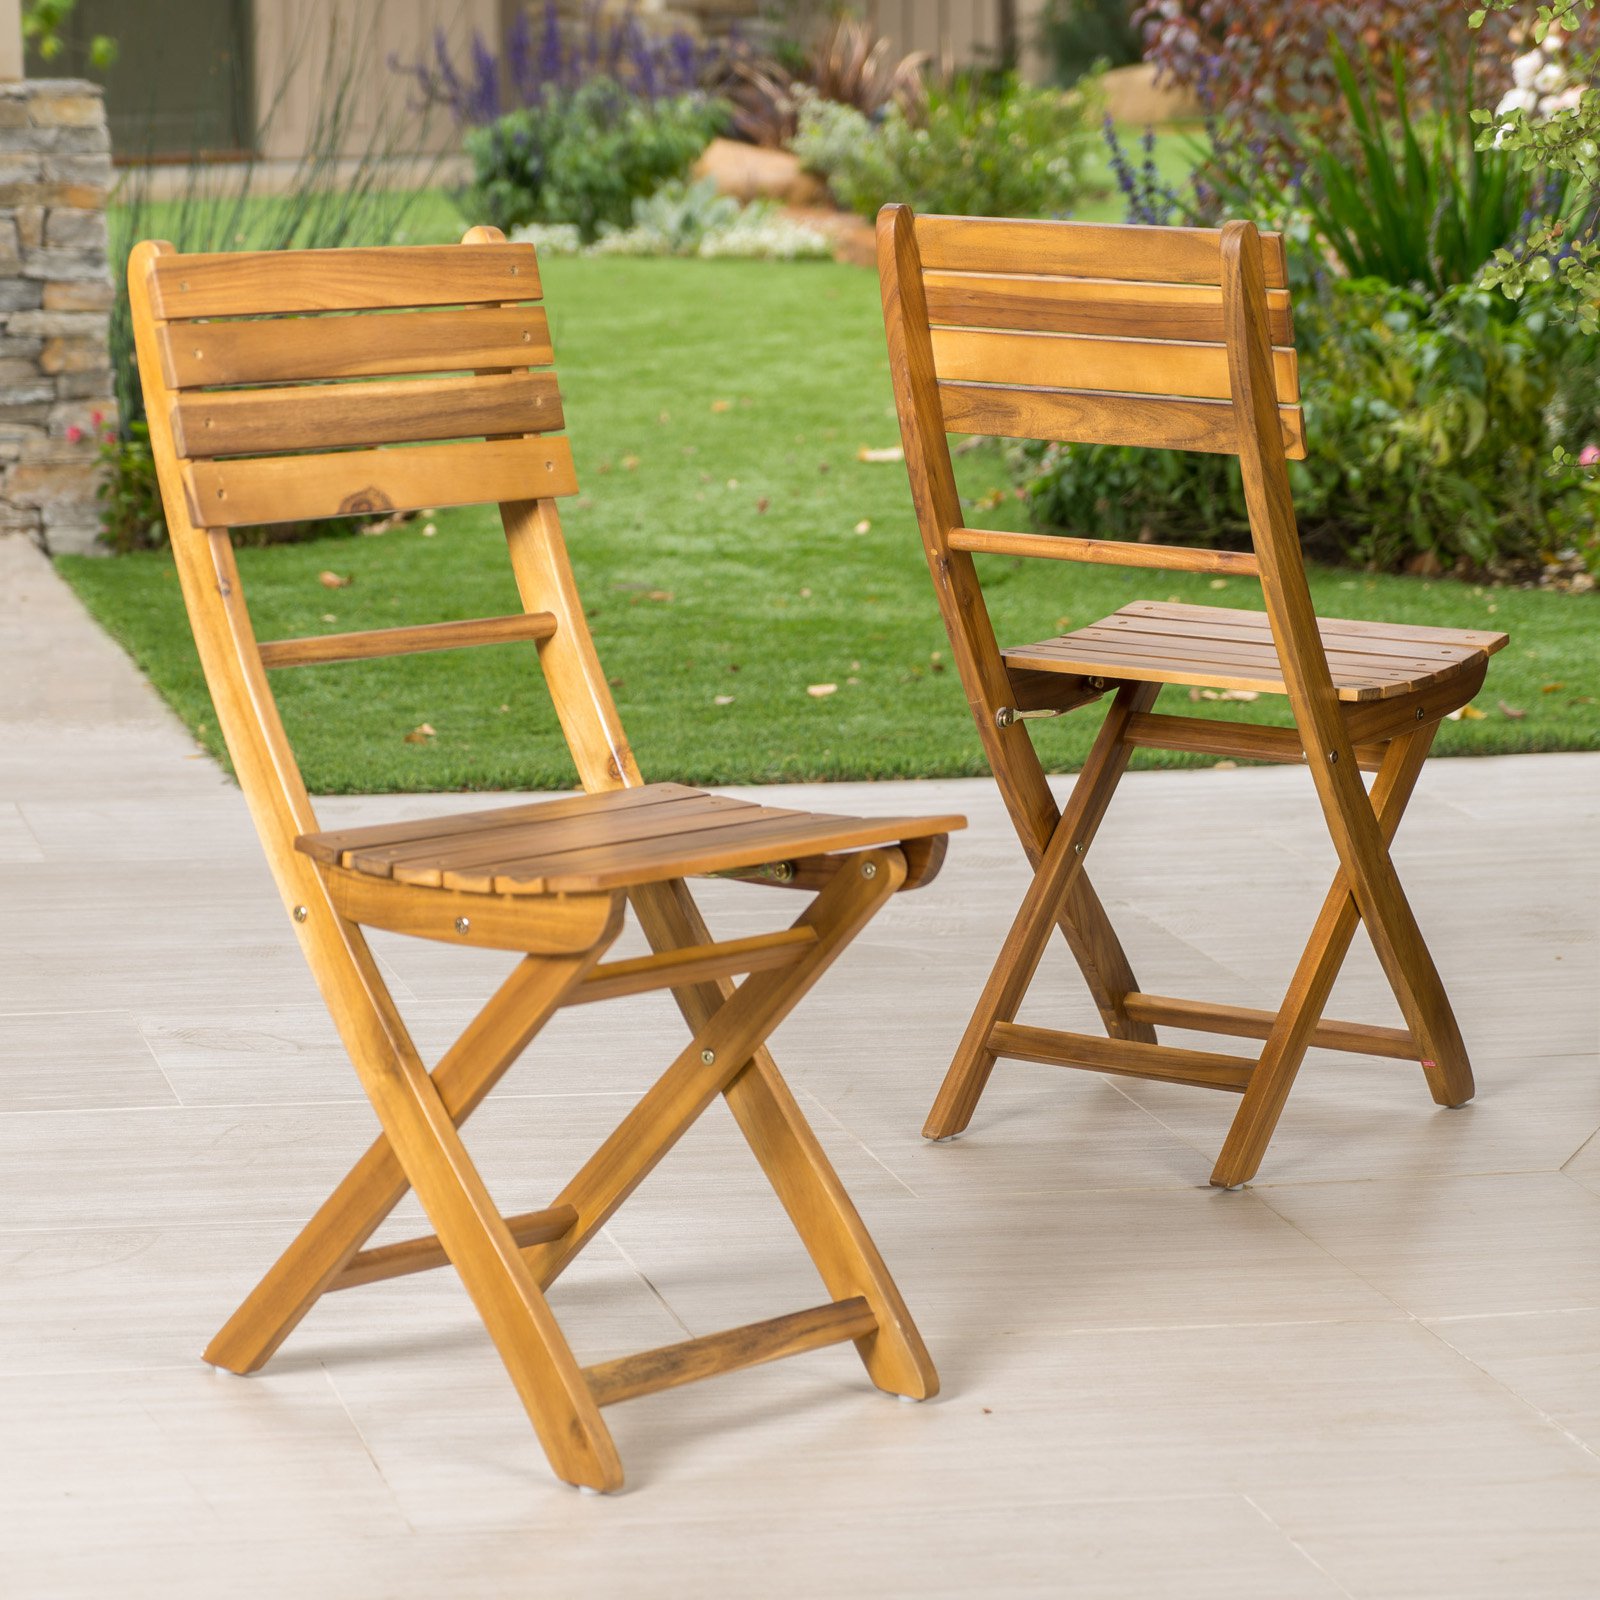 Pablo Acacia Wood Foldable Patio Dining Chairs - image 2 of 11